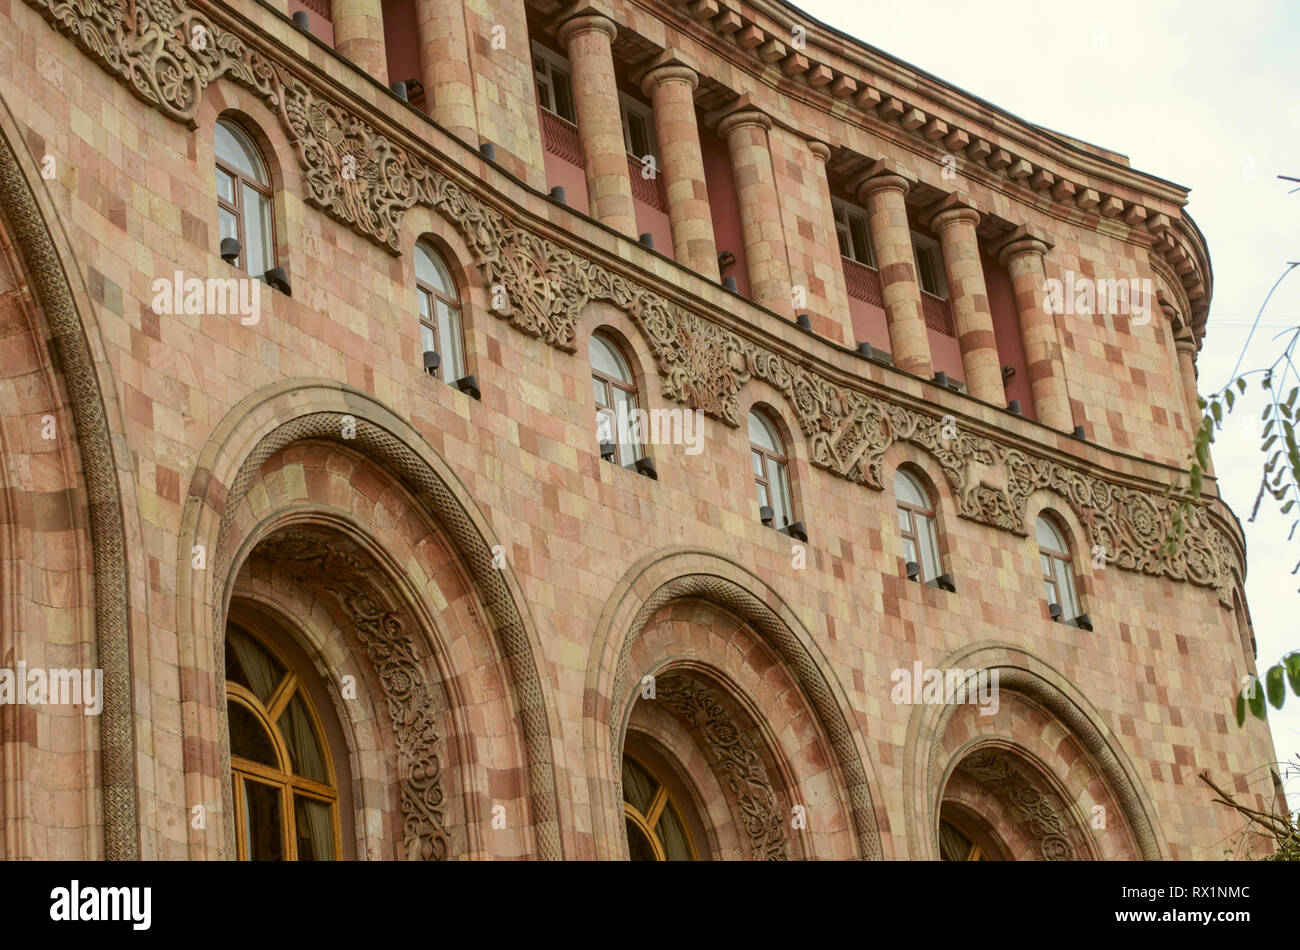 The upper corner of the administrative building on the square in Yerevan built of colorful stone, with loggias, columns, arches and beautiful edging o Stock Photo